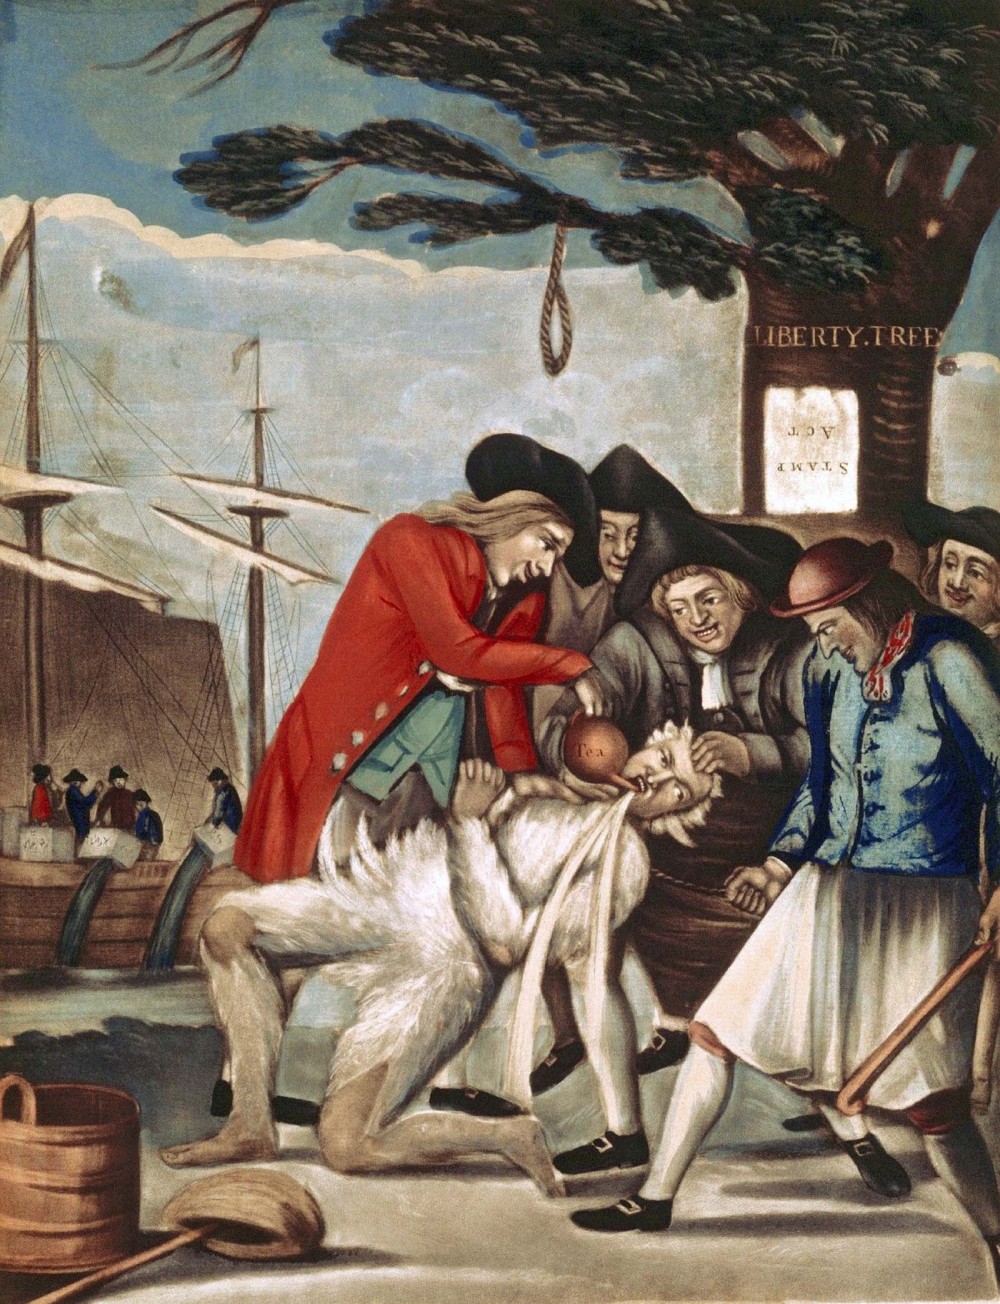 Violent protest by groups like the Sons of Liberty created quite a stir both in the colonies and in England itself. While extreme acts like the tarring and feathering of Boston’s Commissioner of Customs in 1774 propagated more protest against symbols of Parliament’s tyranny throughout the colonies, violent demonstrations were regarded as acts of terrorism by British officials. This print of the 1774 event was from the British perspective, picturing the Sons as brutal instigators with almost demonic smiles on their faces as they enacted this excruciating punishment on the Custom Commissioner. Philip Dawe (attributed), “The Bostonians Paying the Excise-man, or Tarring and Feathering,” Wikimedia, http://commons.wikimedia.org/wiki/File:Philip_Dawe_%28attributed%29,_The_Bostonians_Paying_the_Excise-man,_or_Tarring_and_Feathering_%281774%29.jpg. 